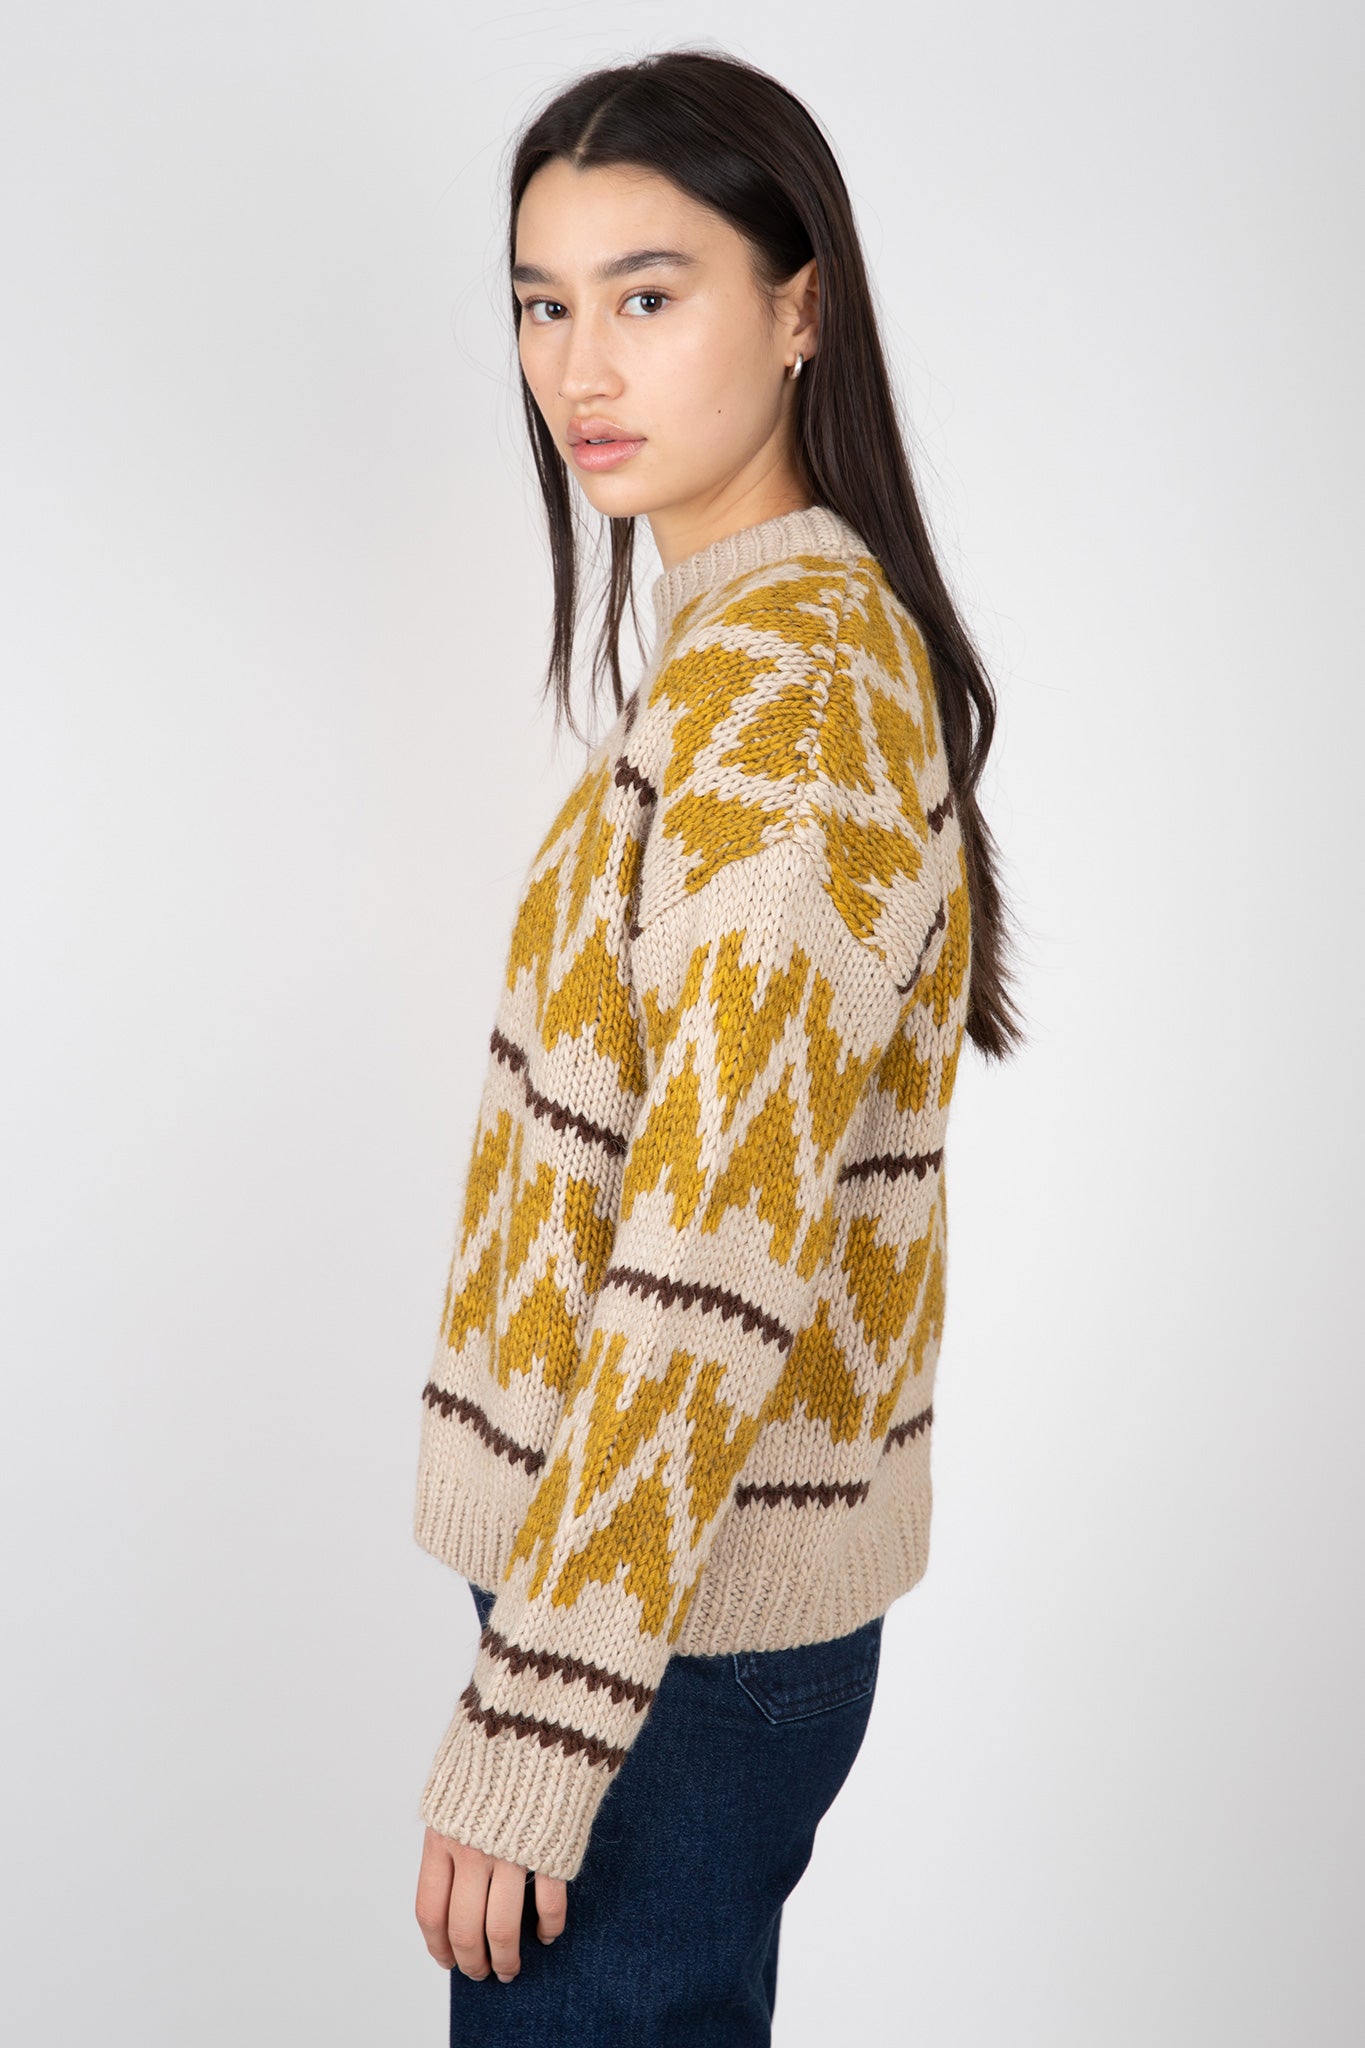    The-Great-The-Folk-Pullover-Earth-Tone